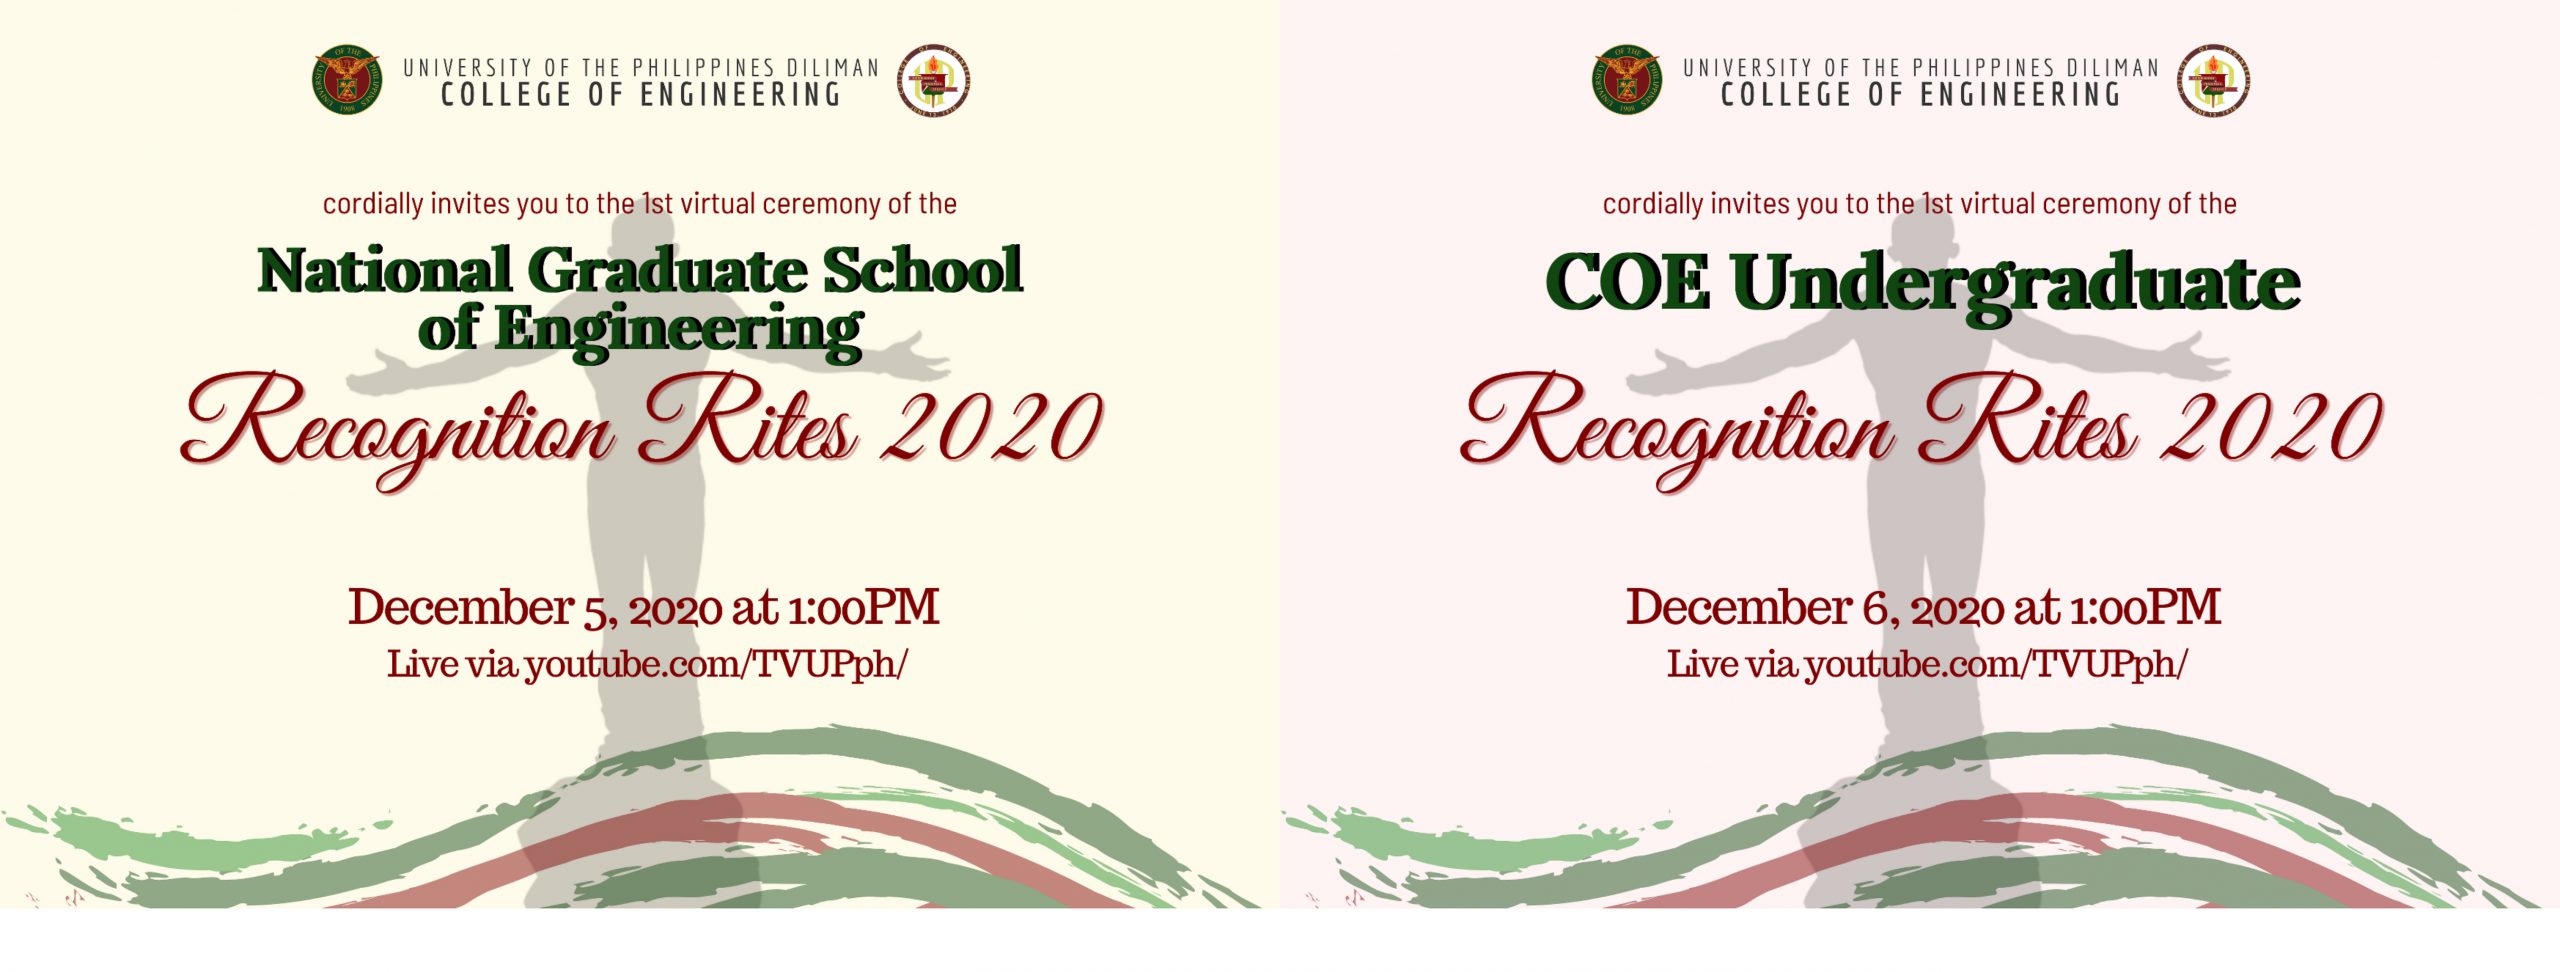 CoE Recognition Rites for NGSE and Undergraduates on Dec 5 & 6